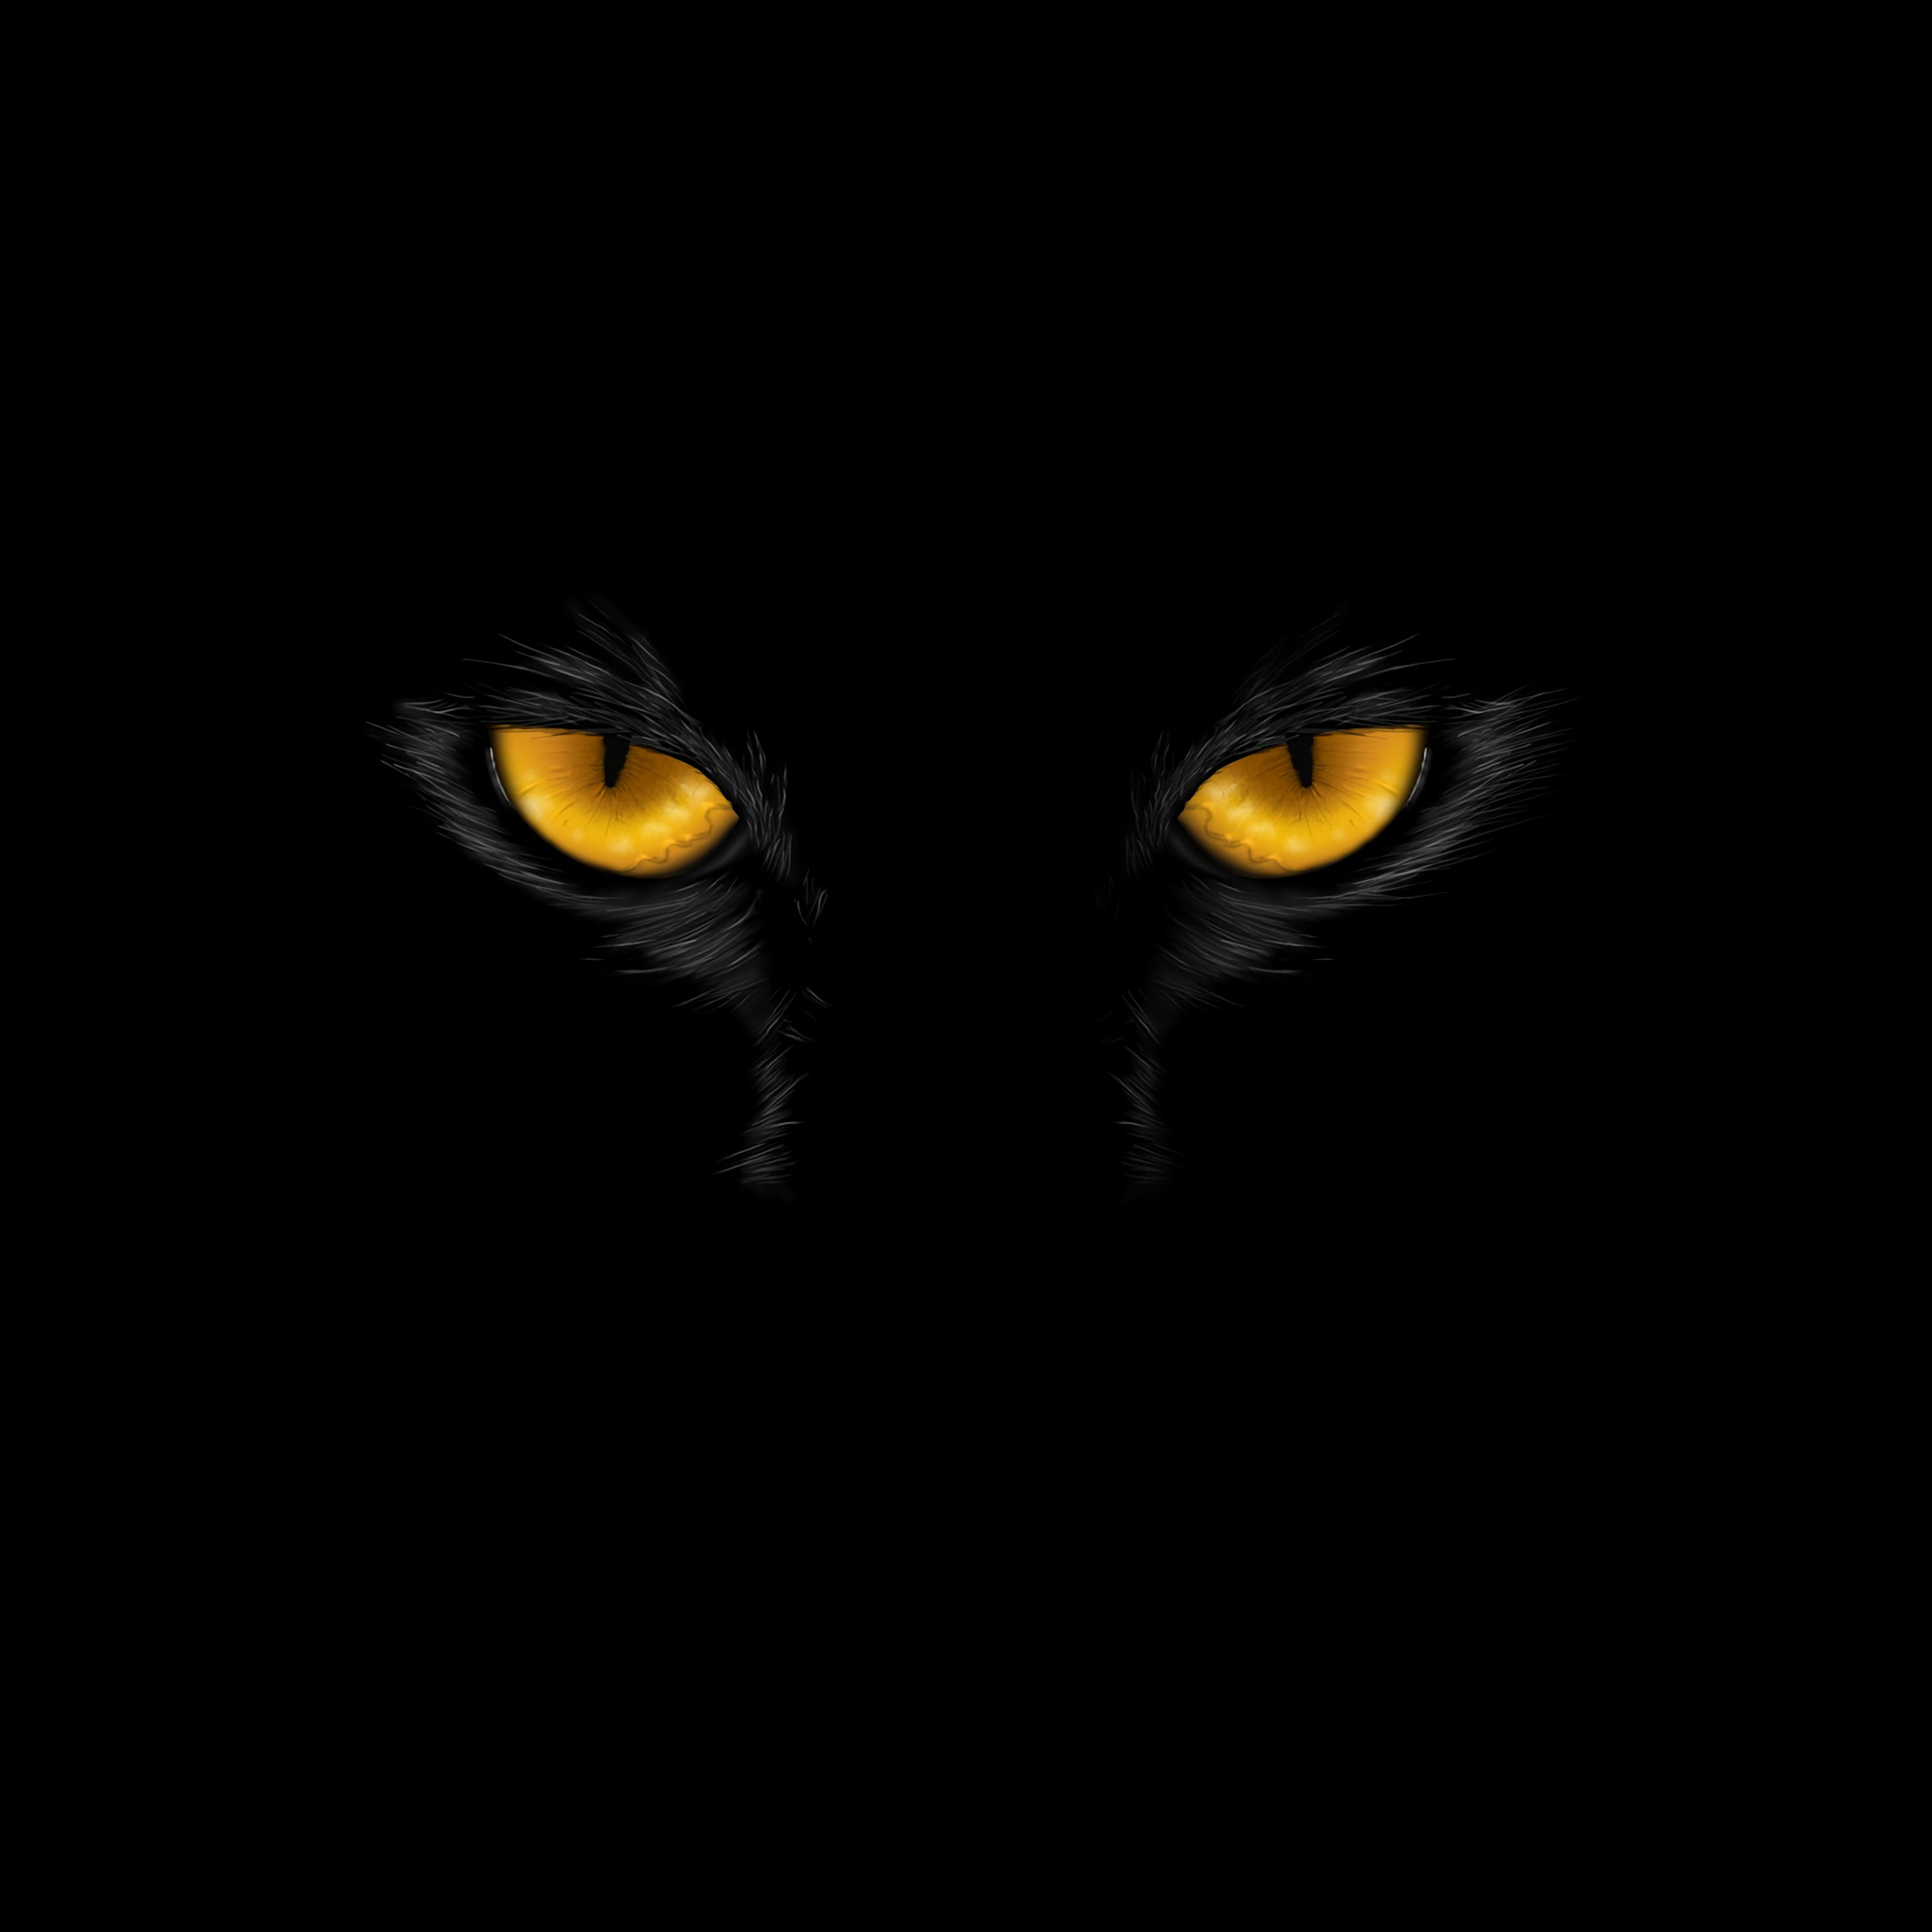 53627 download wallpaper dark, black, eyes, art screensavers and pictures for free